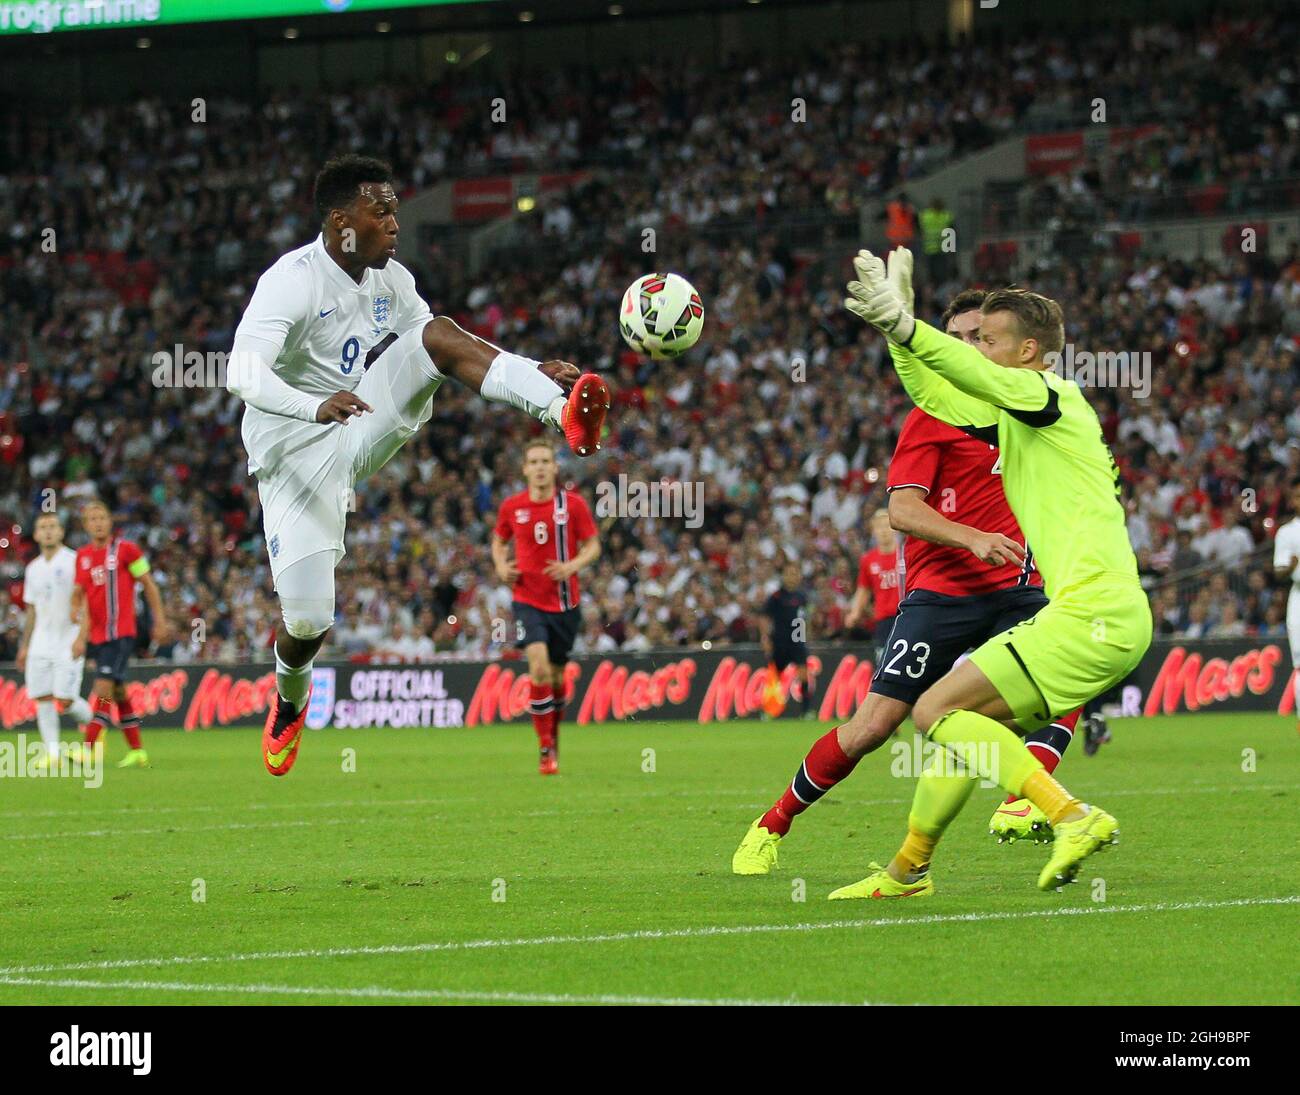 England's Daniel Sturridge lobs the ball over the bar during the International Friendly match between England and Norway at Wembley Stadium in London, on September 3, 2014. Stock Photo